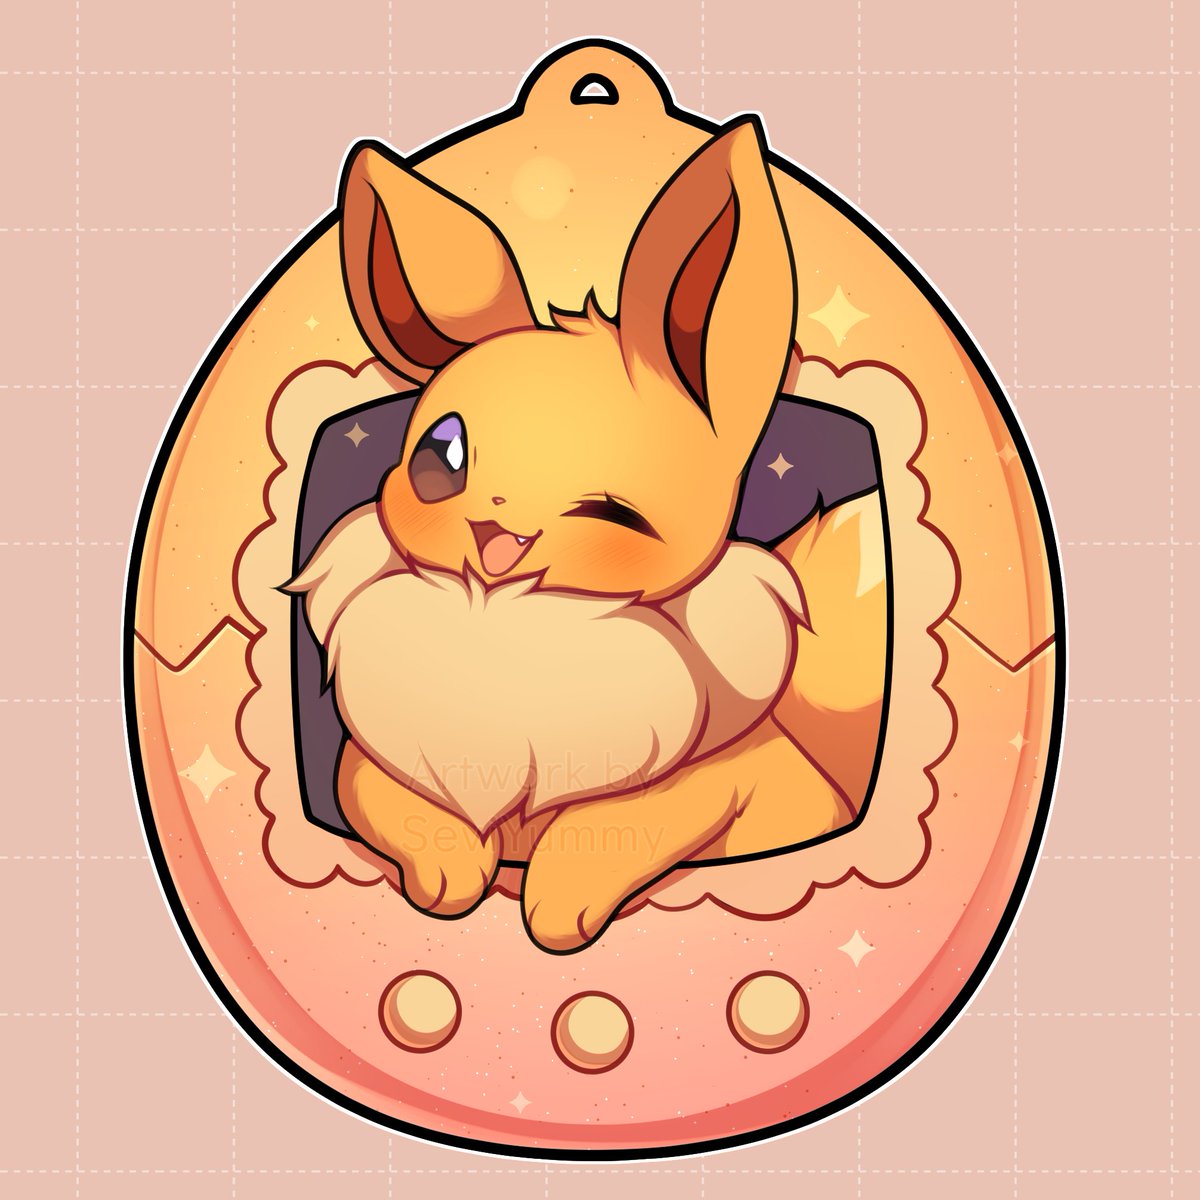 「✨🌸 Eevee Tamagotchi ~ 🌸✨

Did you have」|Sevi 🌸🌿のイラスト